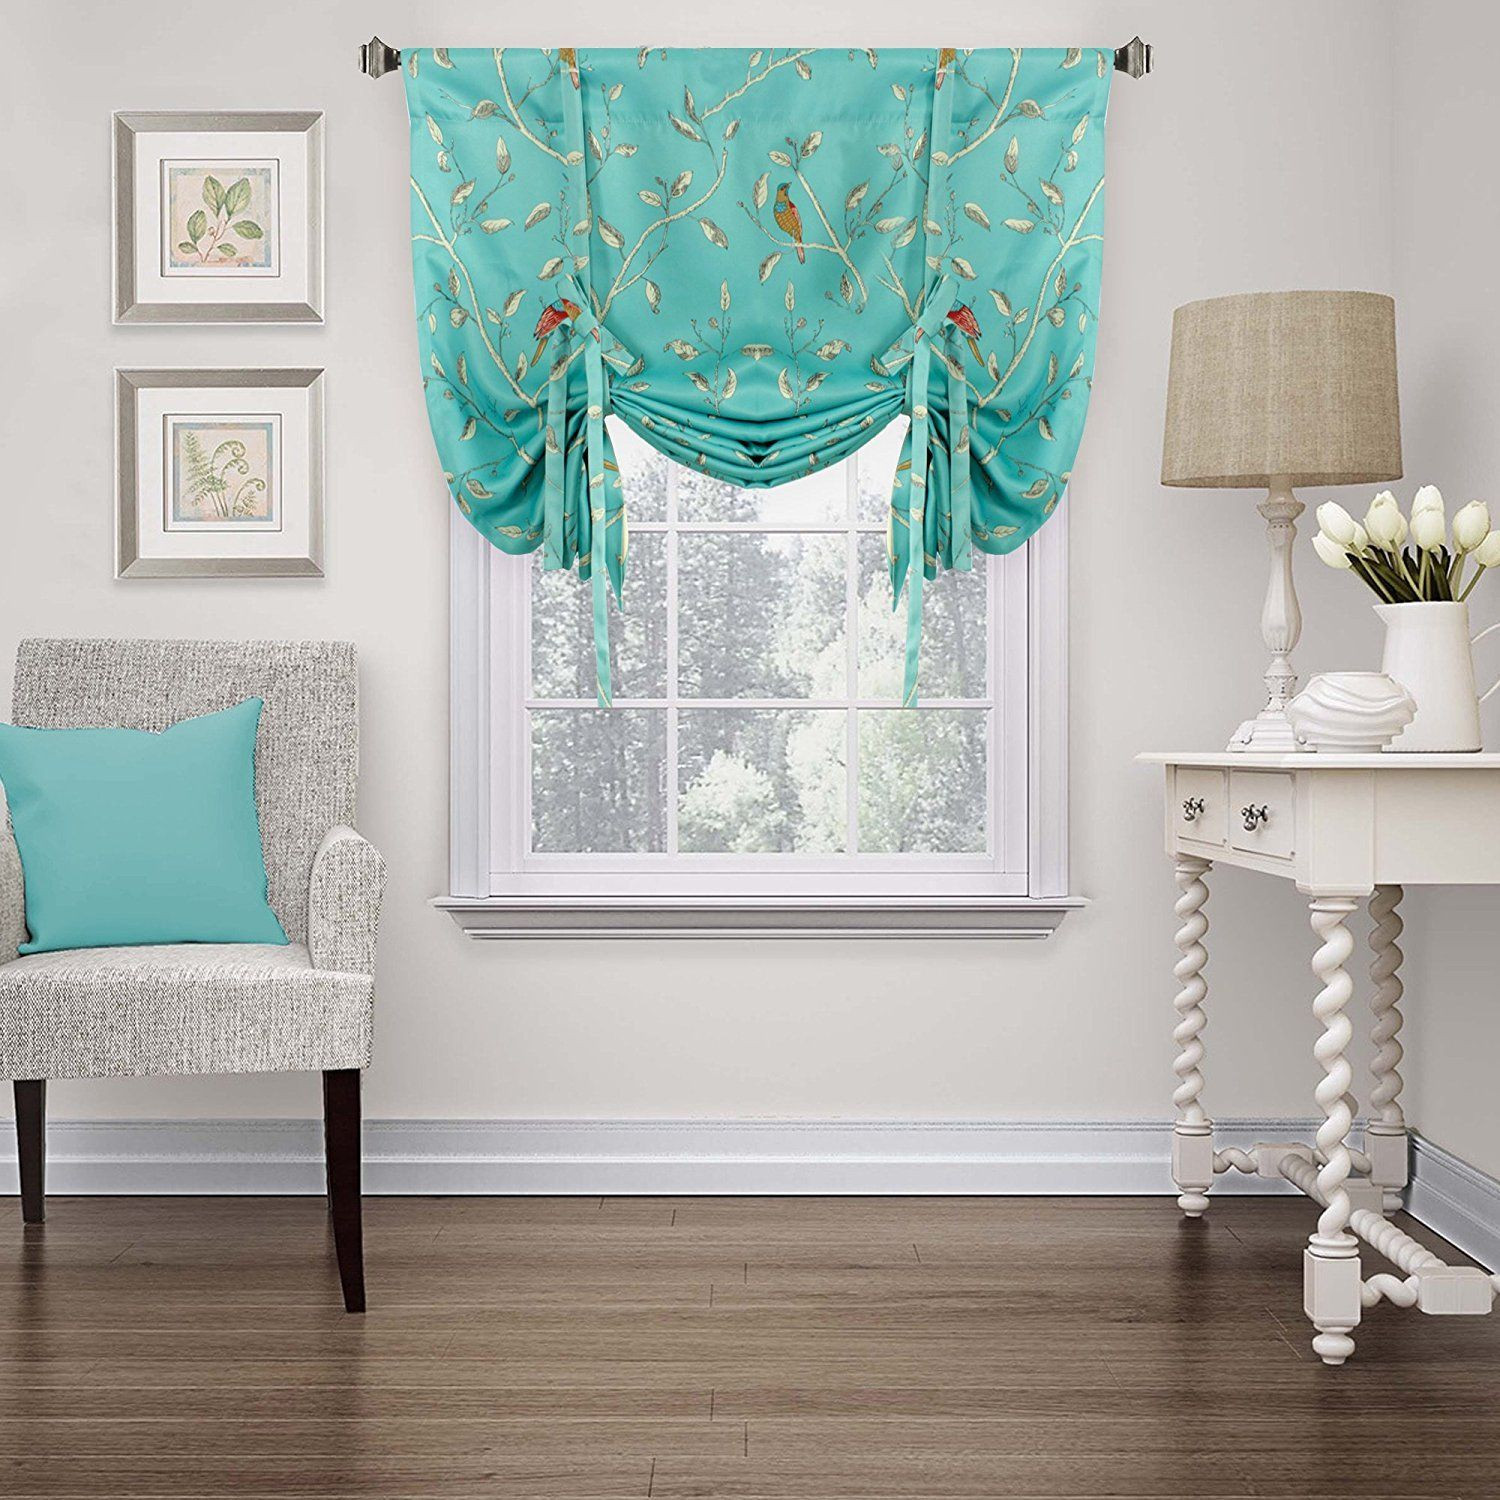 Turquoise Kitchen Curtains
 Turquoise kitchen accessories – Color your kitchen